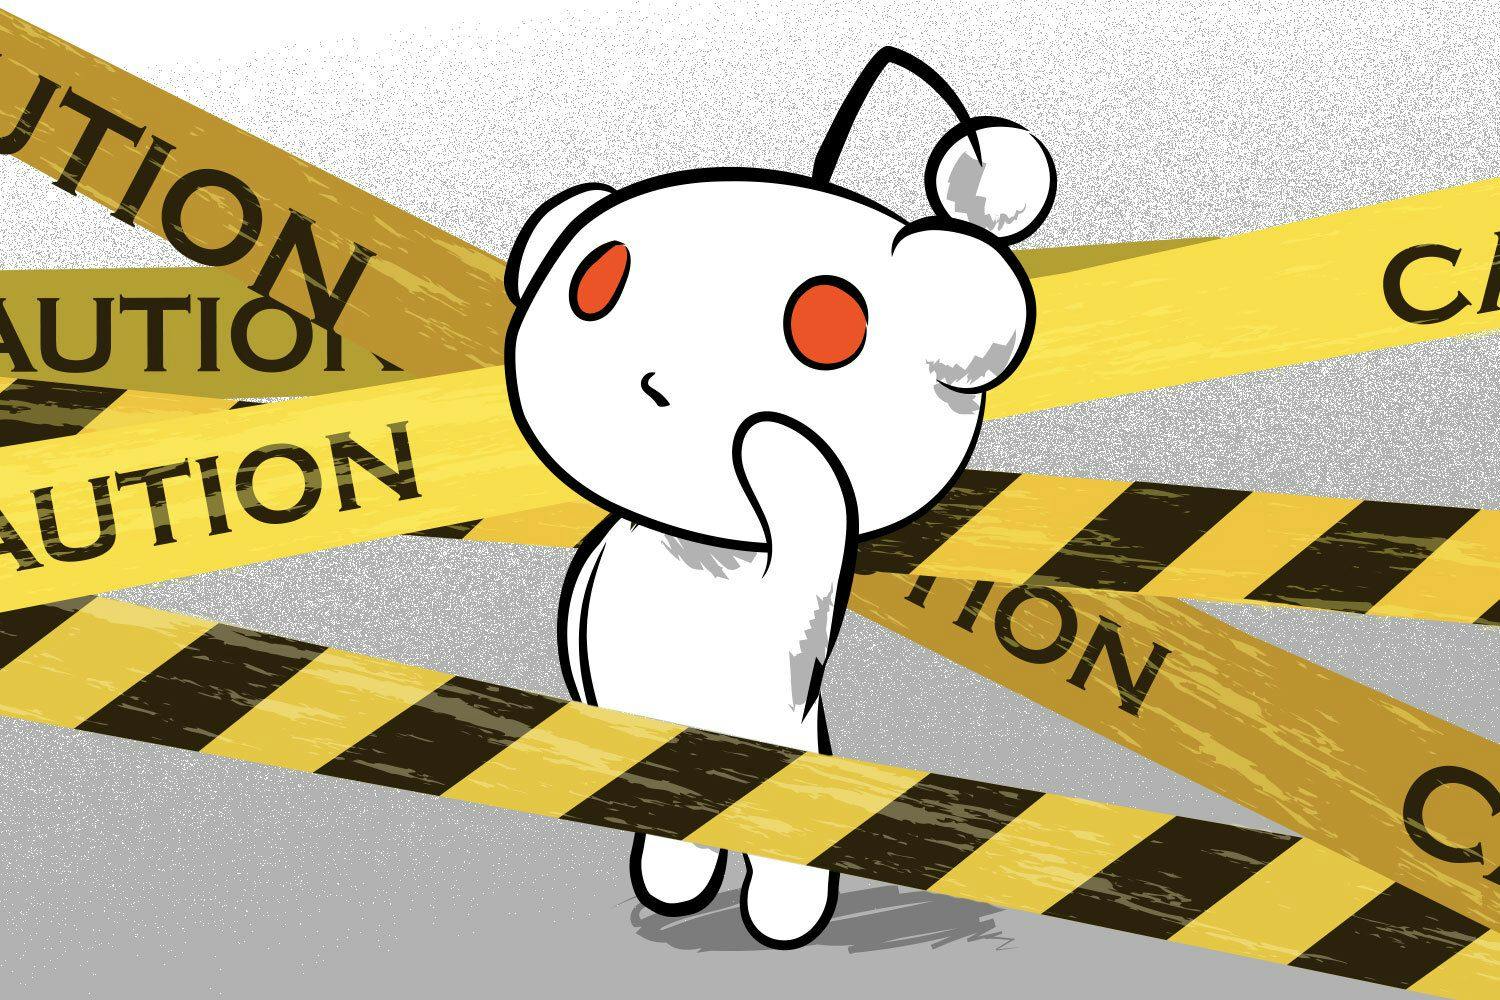 the Reddit mascot Snoo in front of caution tape